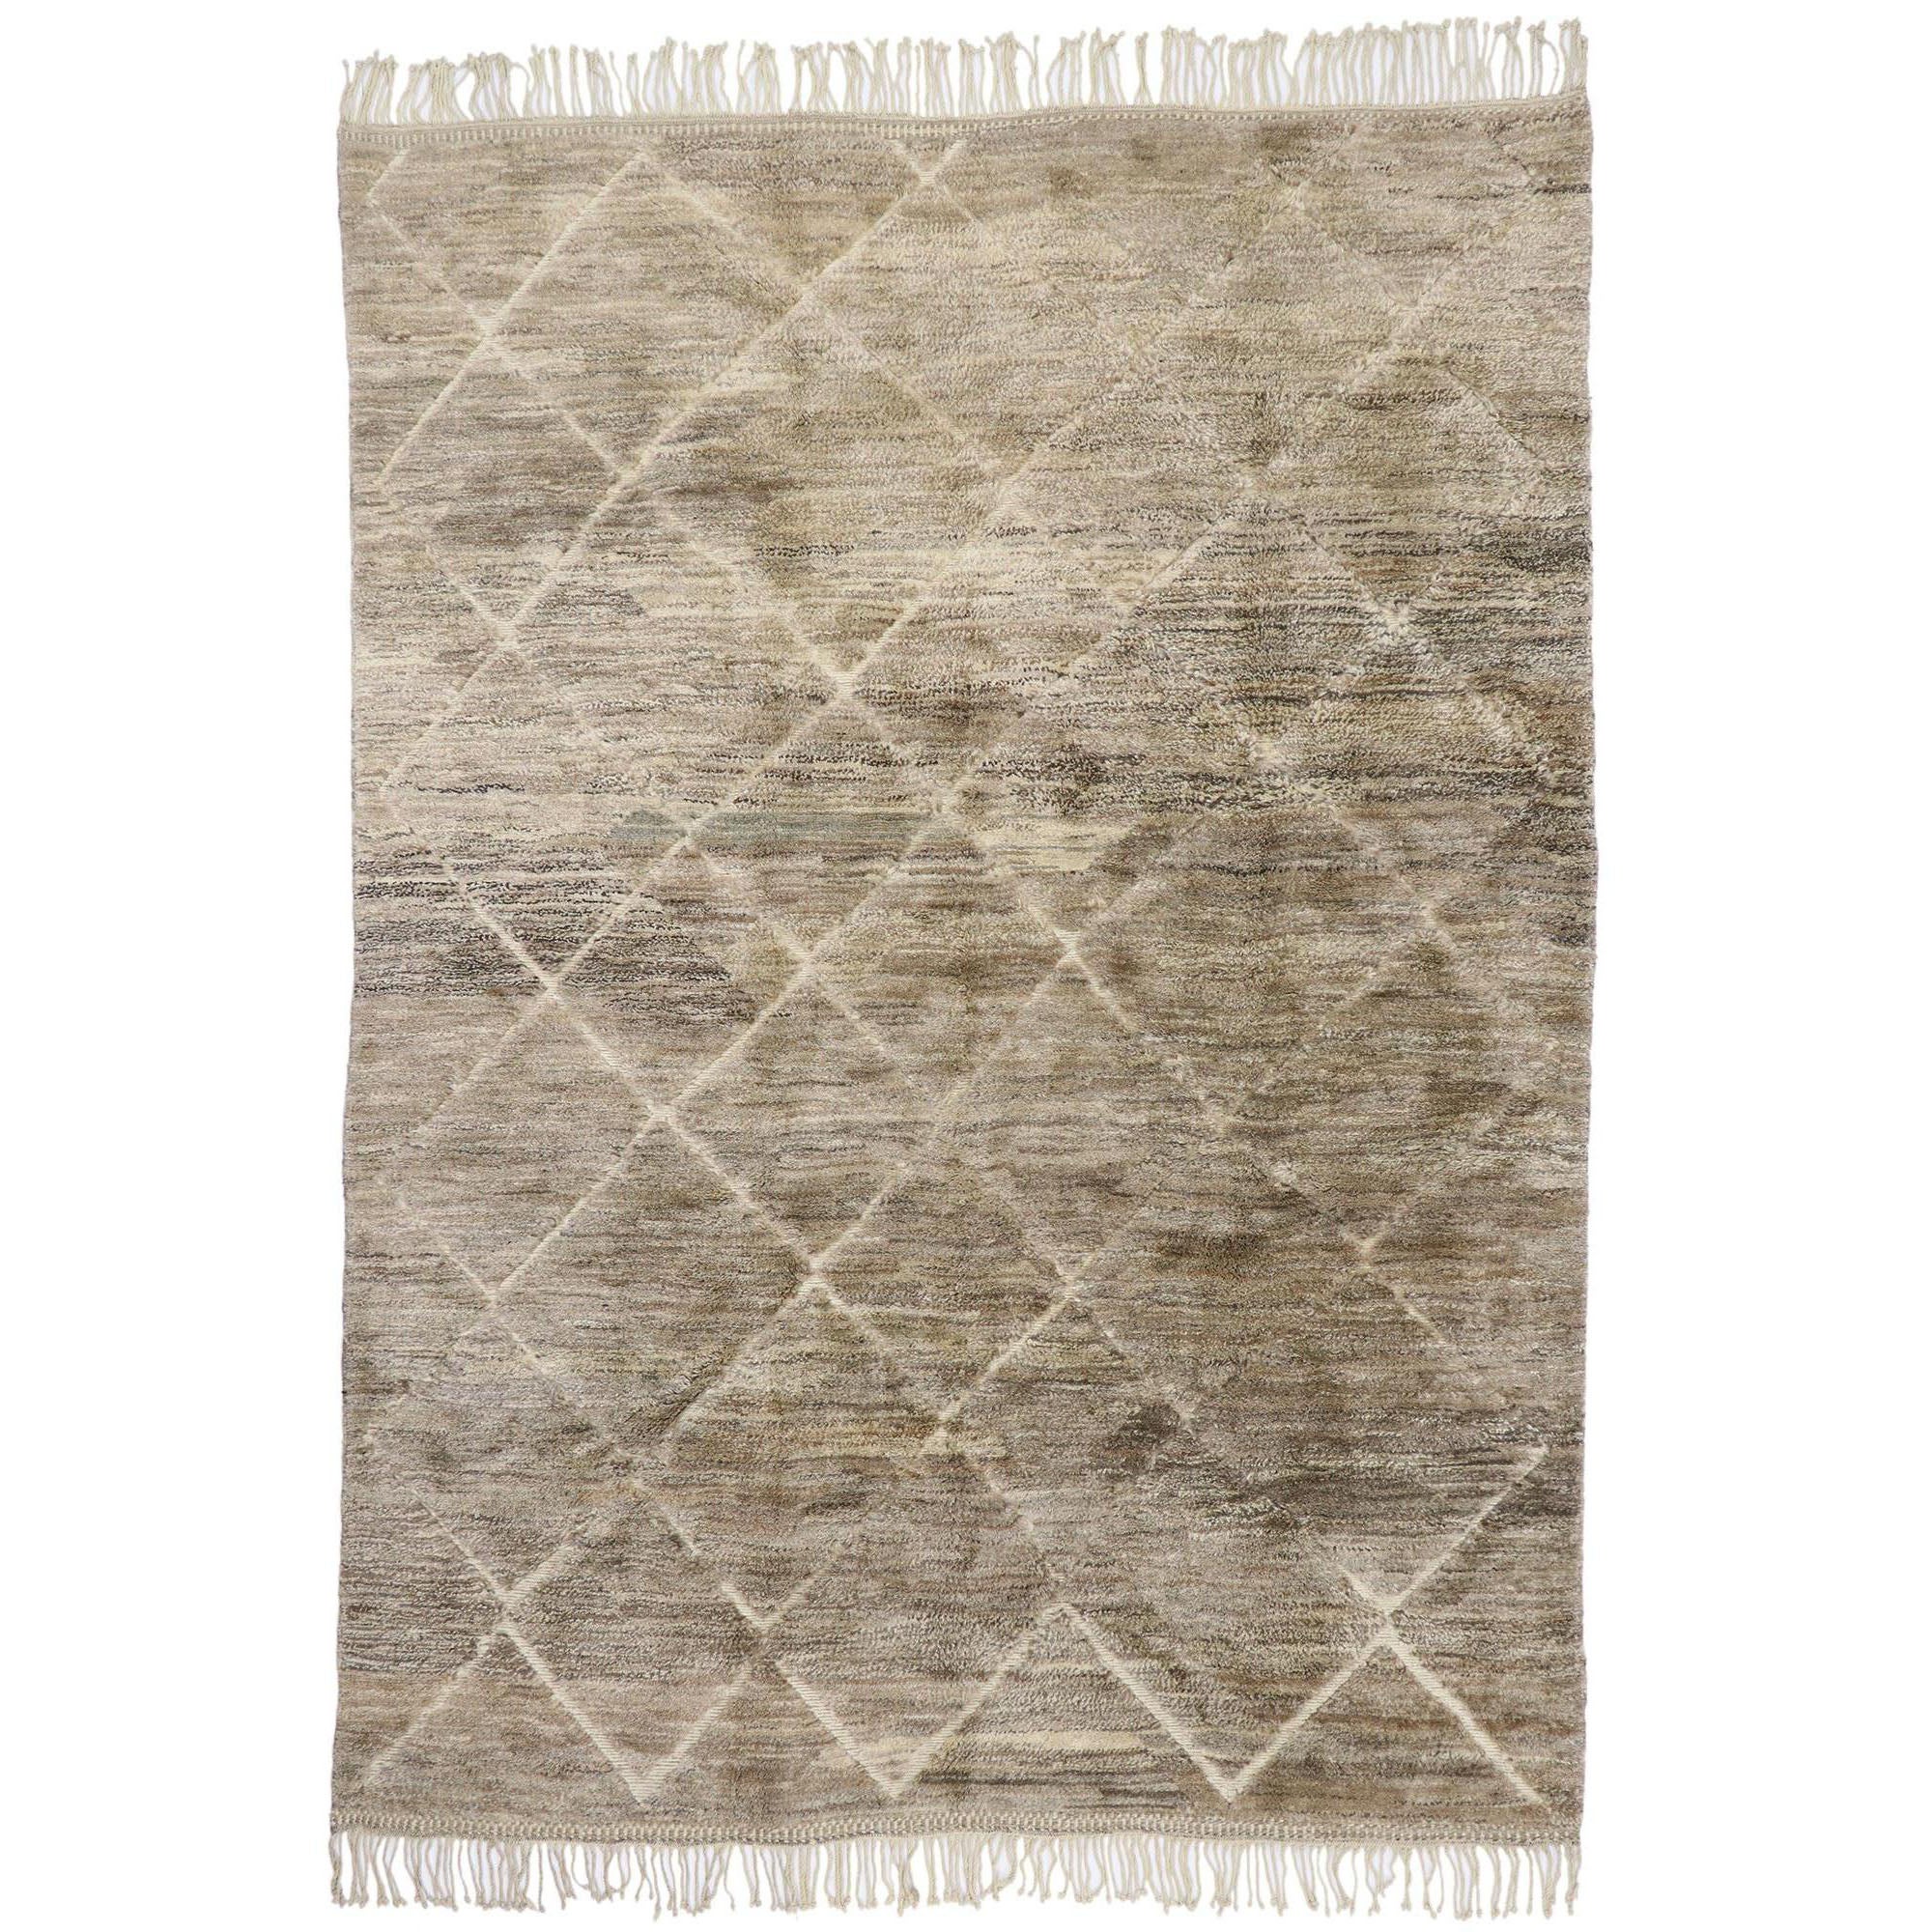 New Contemporary Berber Moroccan Rug with Organic Modern Style